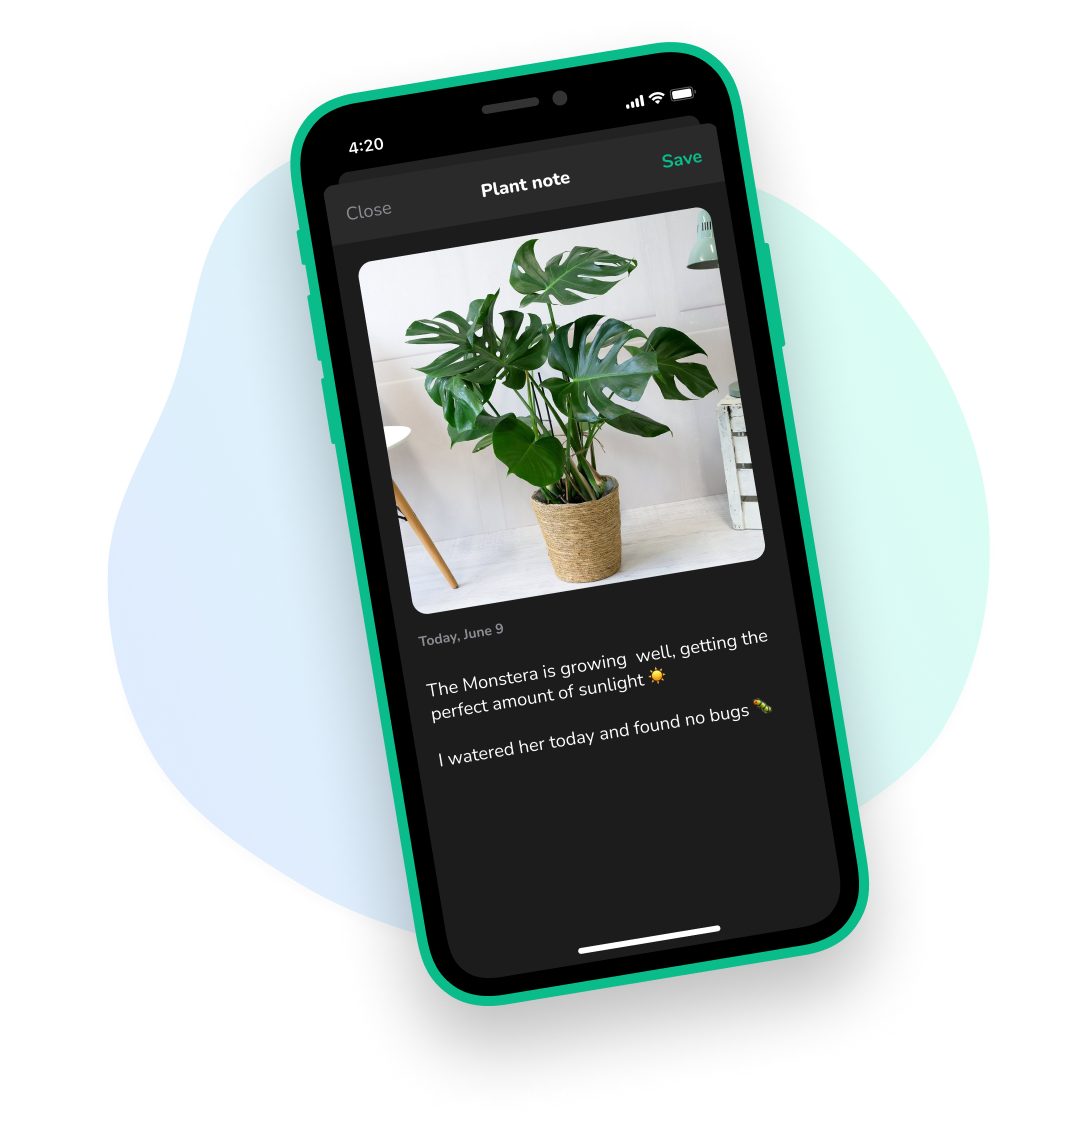 Mobile phone showing the Grow application on the plant note screen with a plant picture and a text describing the plant health